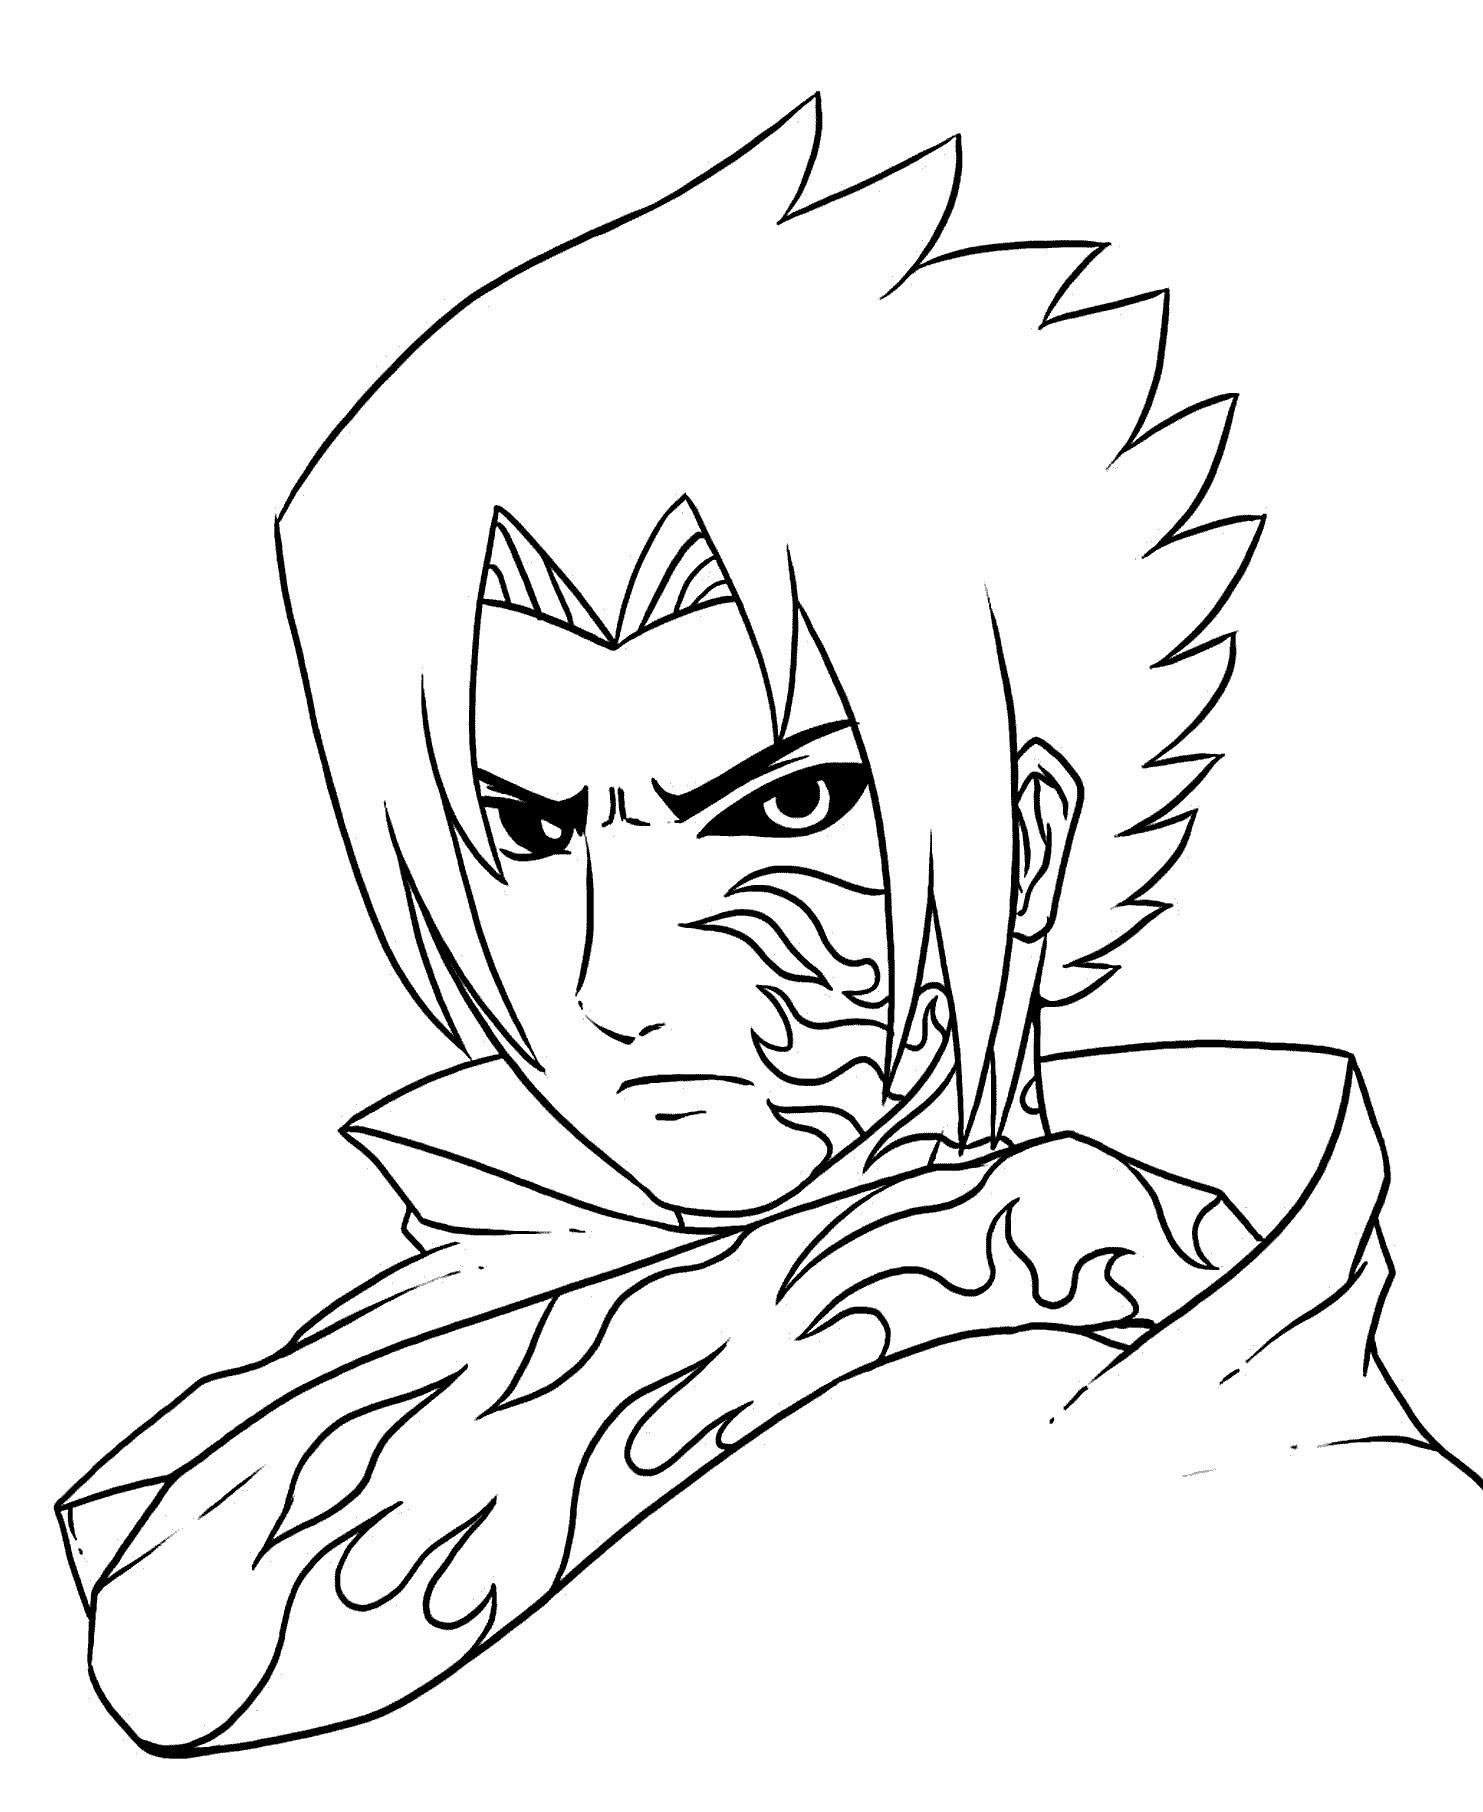 Naruto Coloring Pages - Free Printable Coloring Pages for Kids